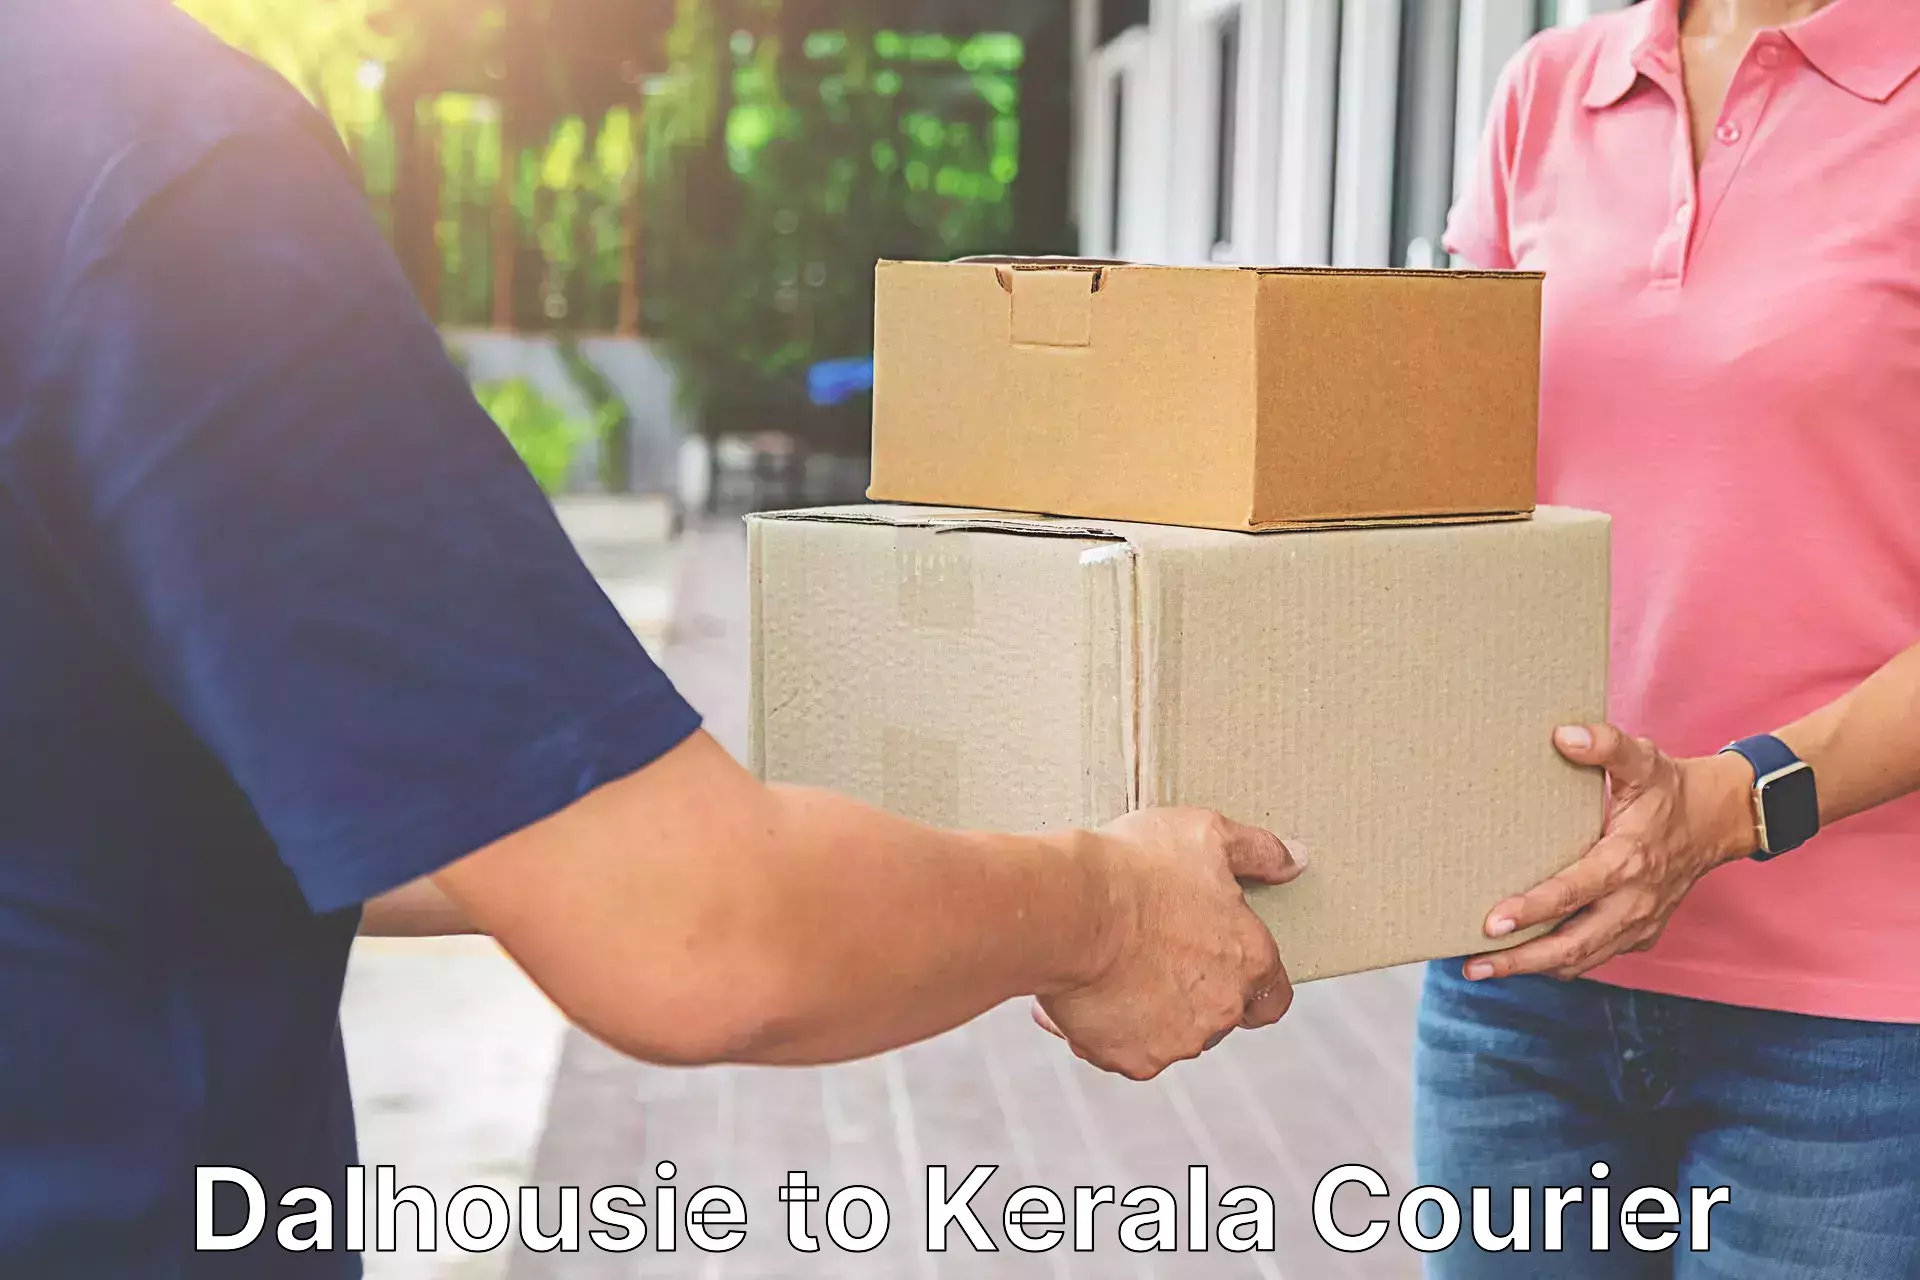 Courier service innovation in Dalhousie to Kerala